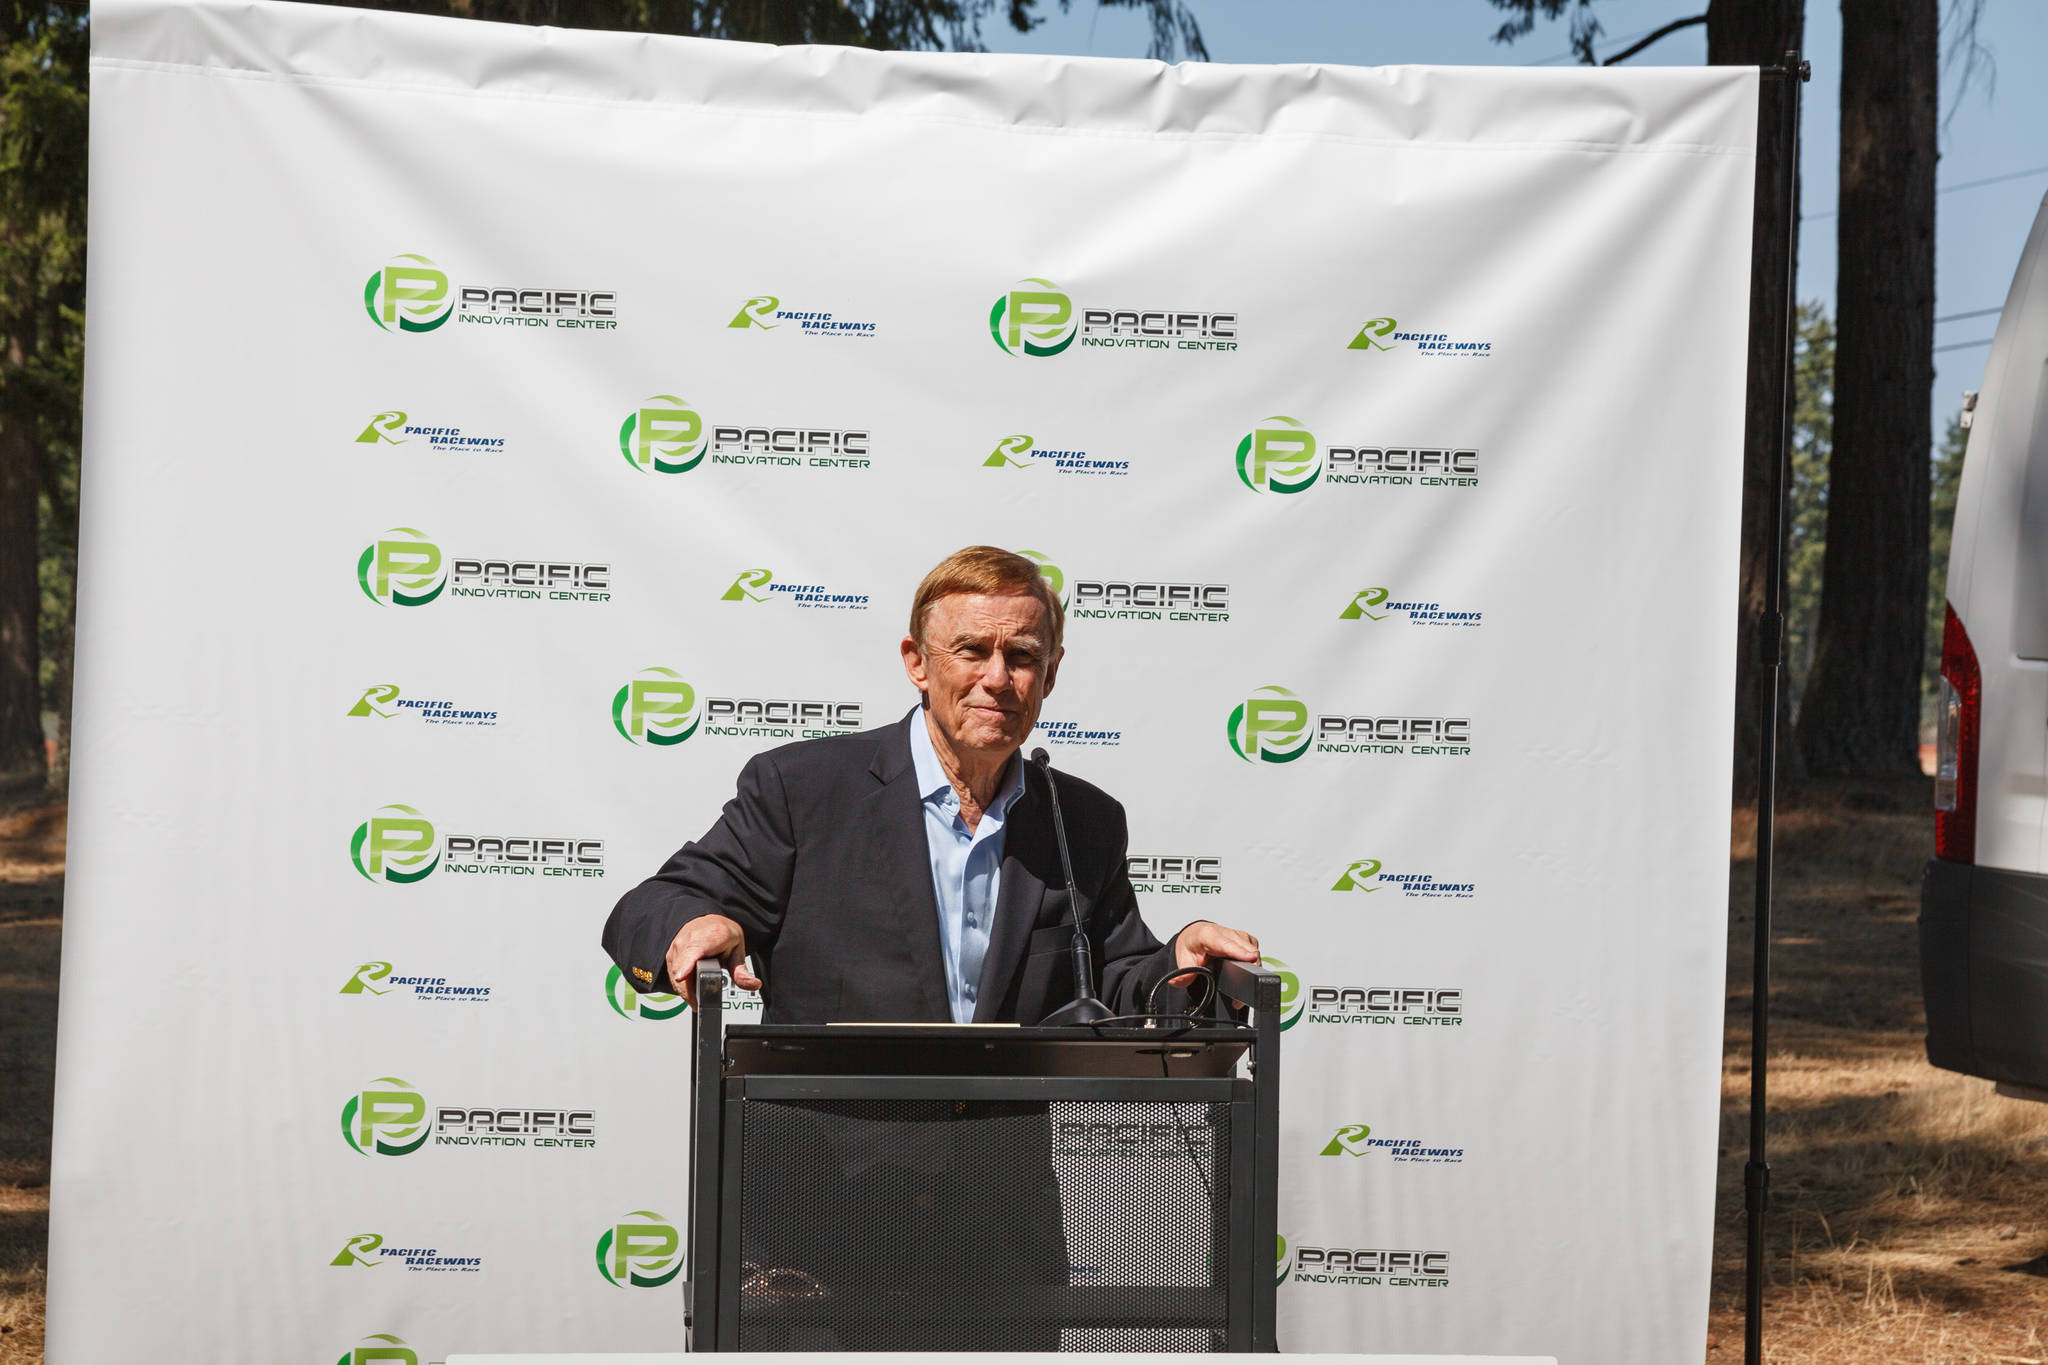 King County Councilmember Pete von Reichbauer gives a speech during the Pacific Raceways groundbreaking event on Wednesday, Aug. 18, 2021. Photo by Henry Stewart-Wood/Sound Publishing